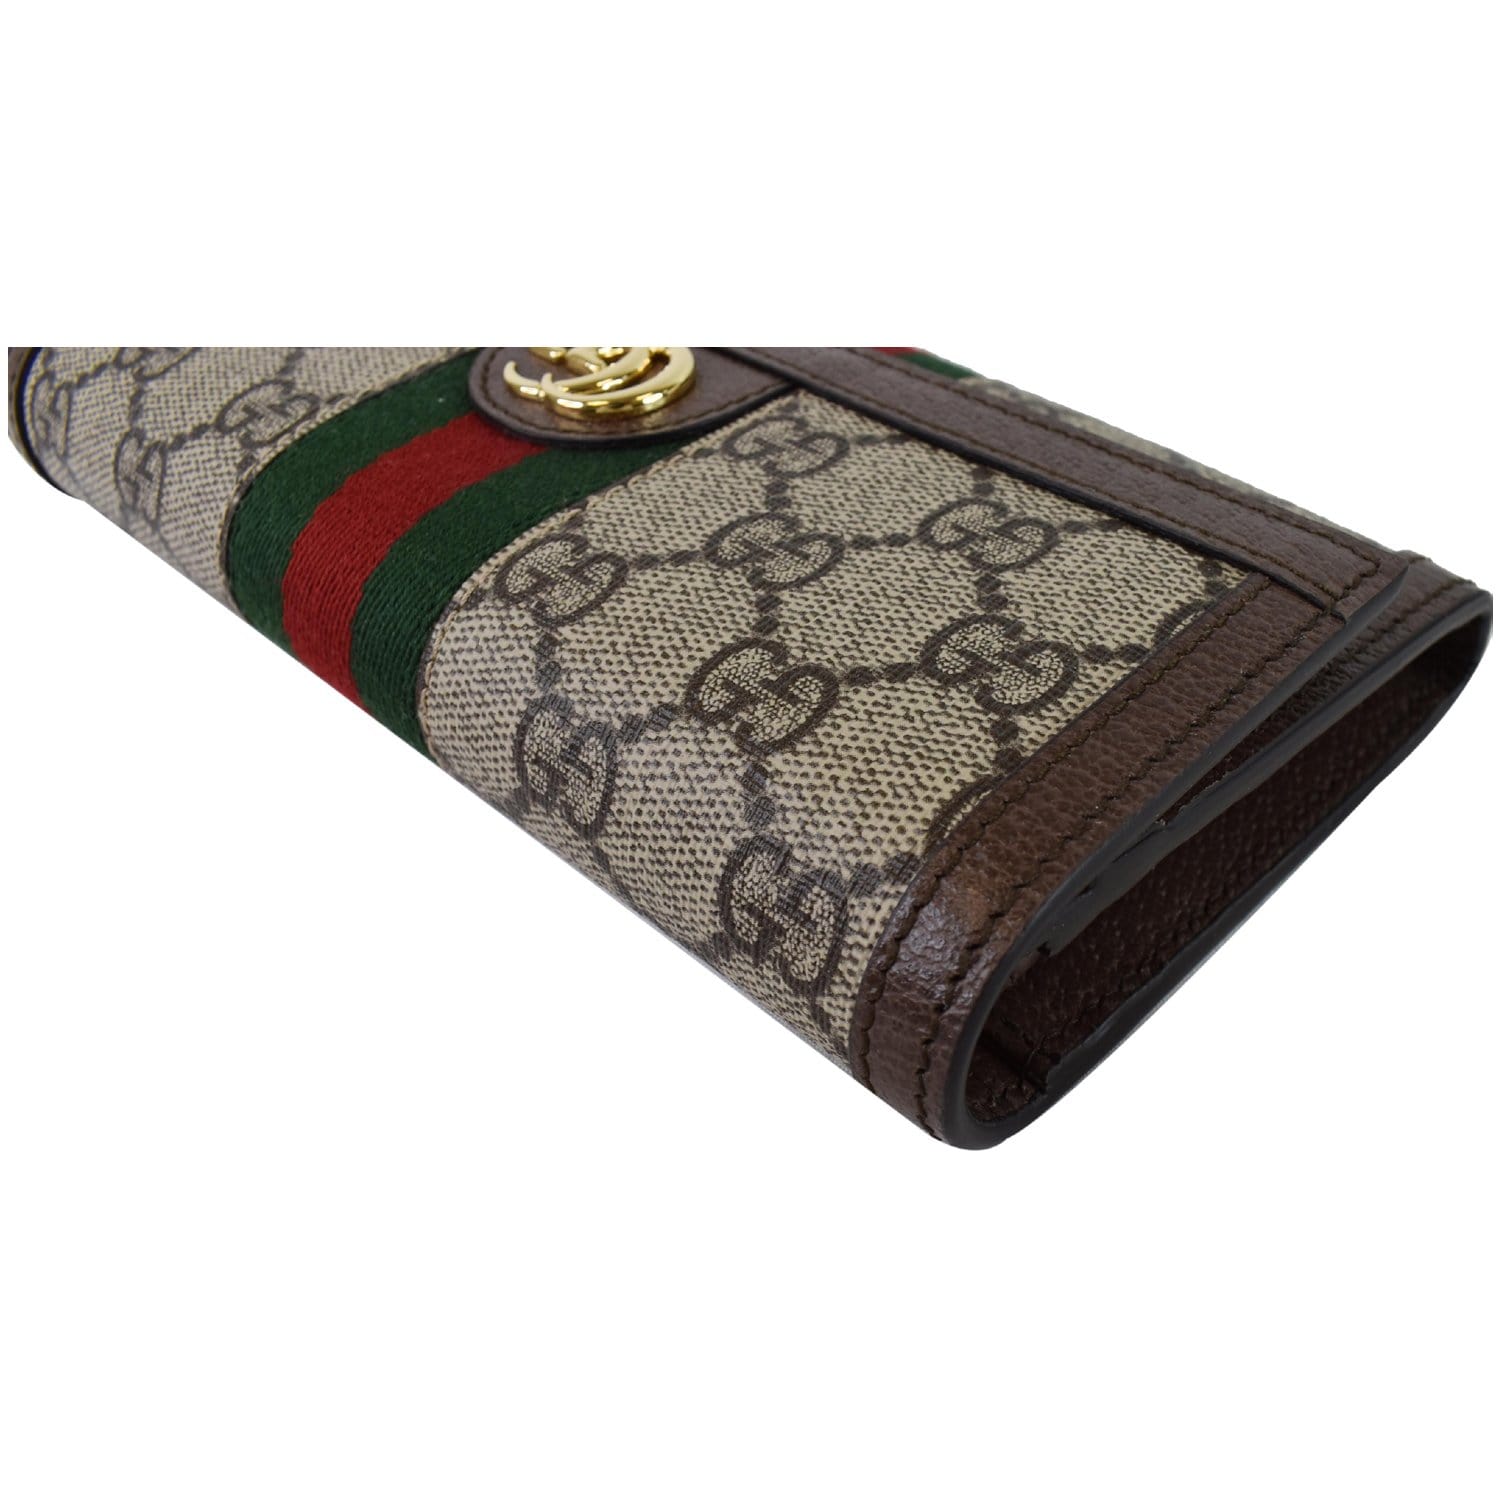 Gucci - GG supreme fabric and leather wallet Beige - The Corner